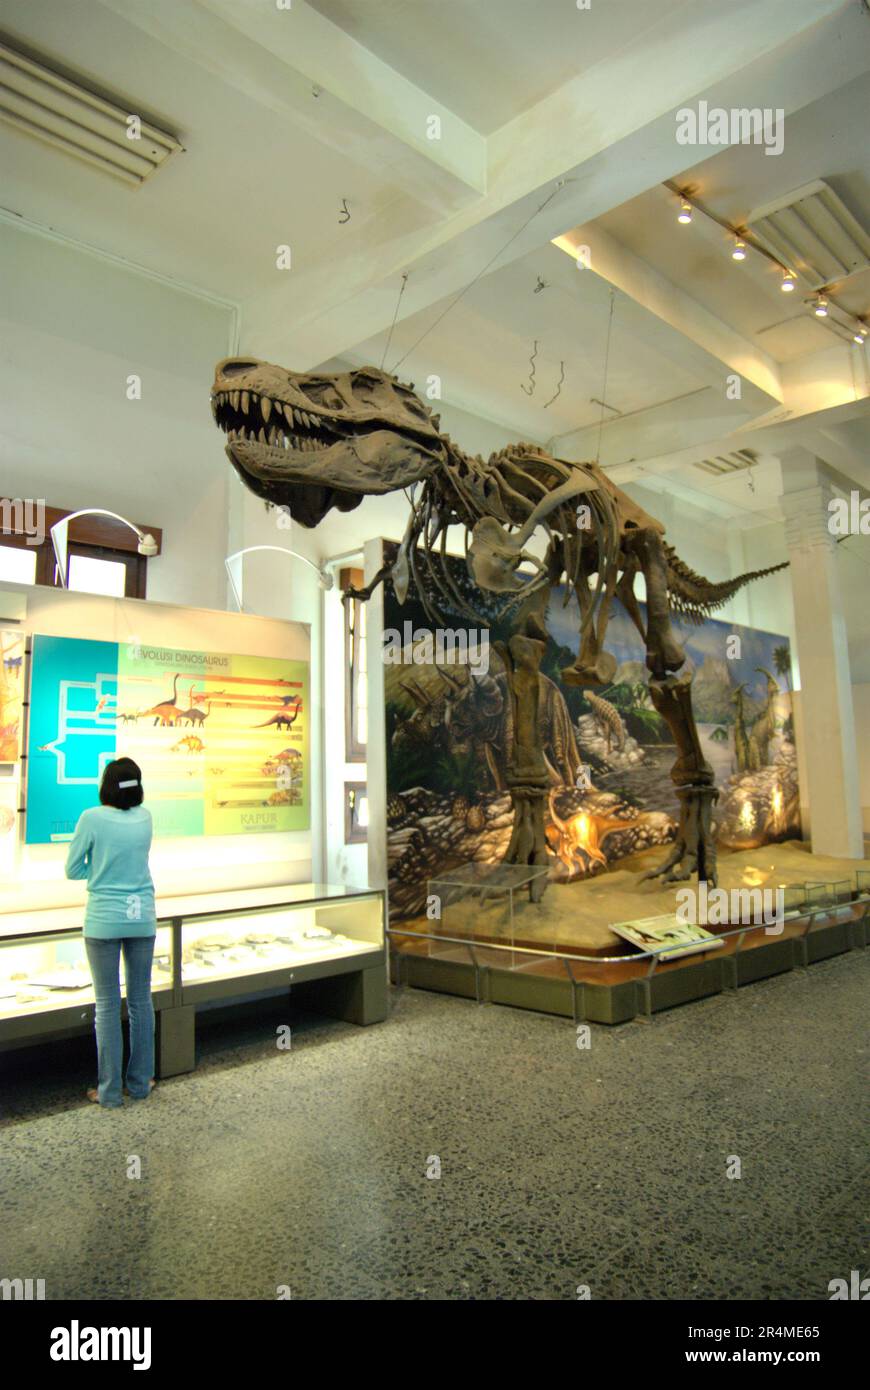 A woman visitor is reading information on panels in front of a reconstruction of a Tyrannosaurus rex at Museum Geologi (Geology Museum) in Bandung, West Java, Indonesia. Stock Photo